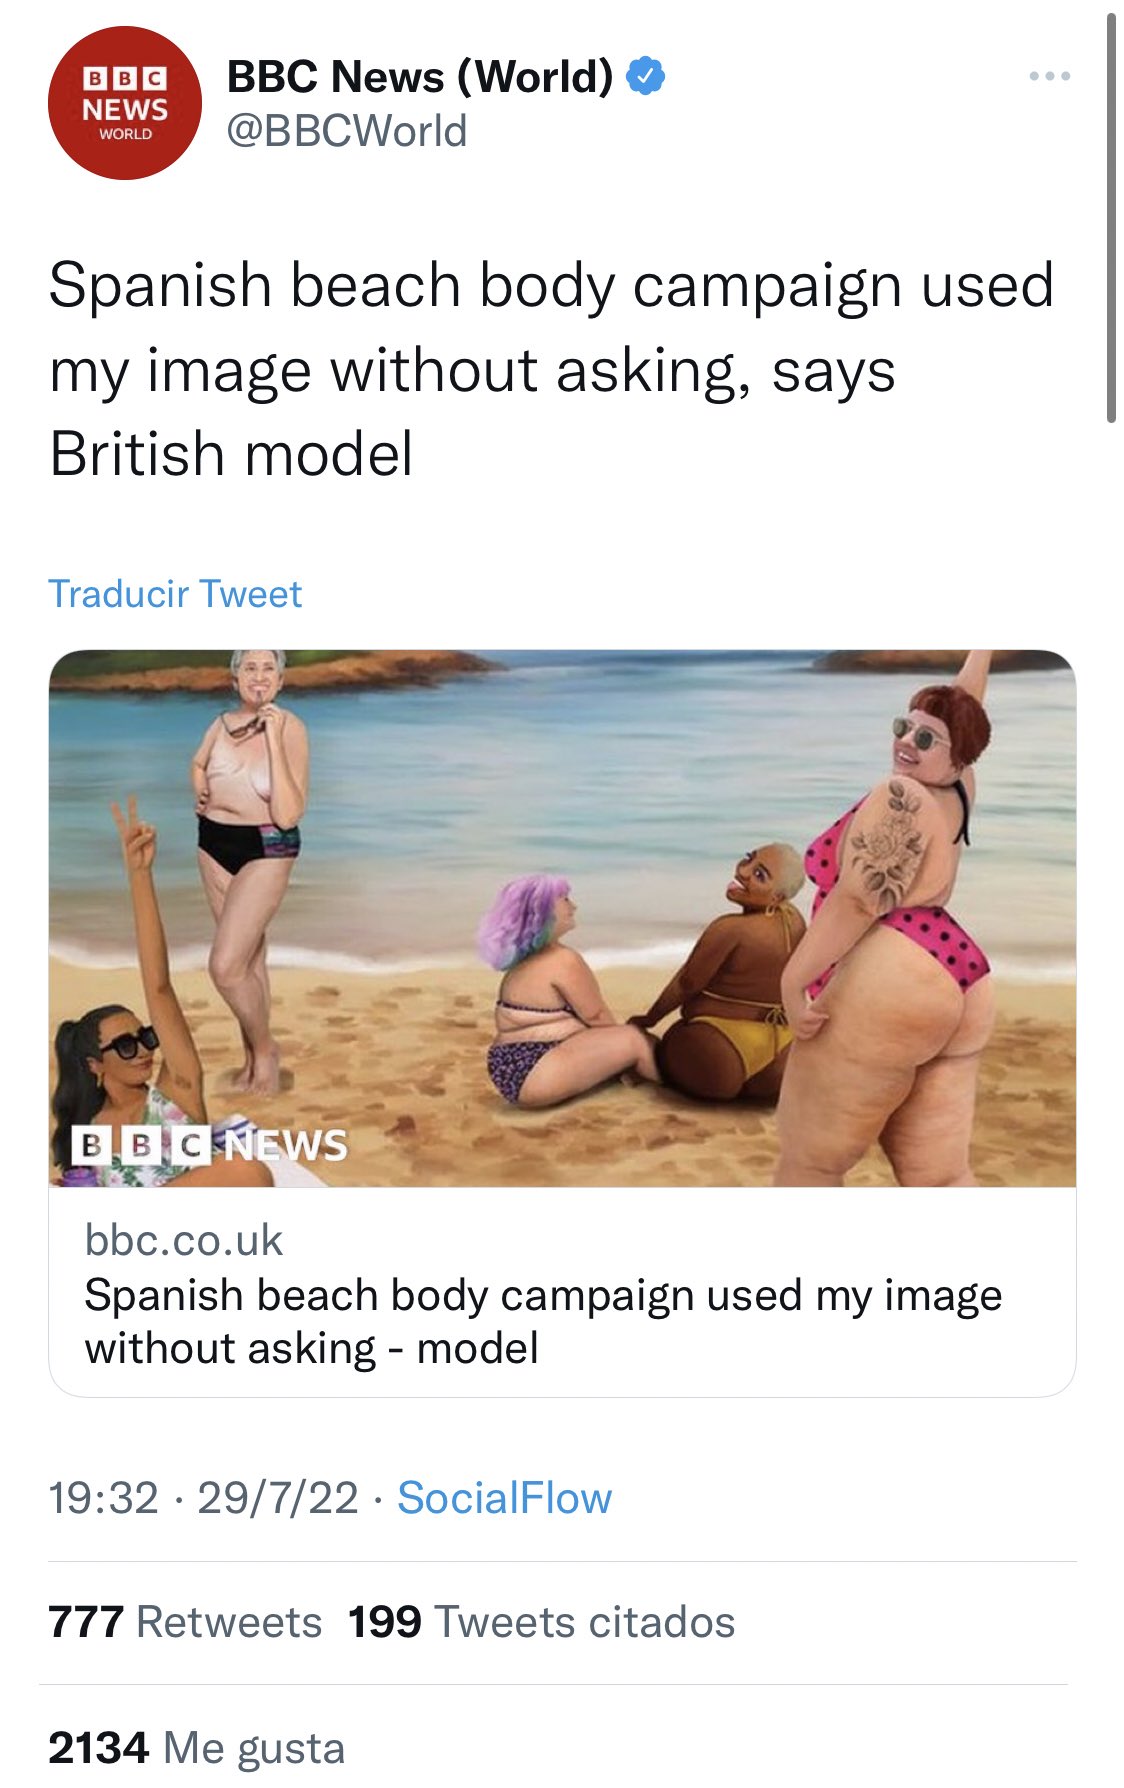 Spanish beach body campaign used my image without asking - model